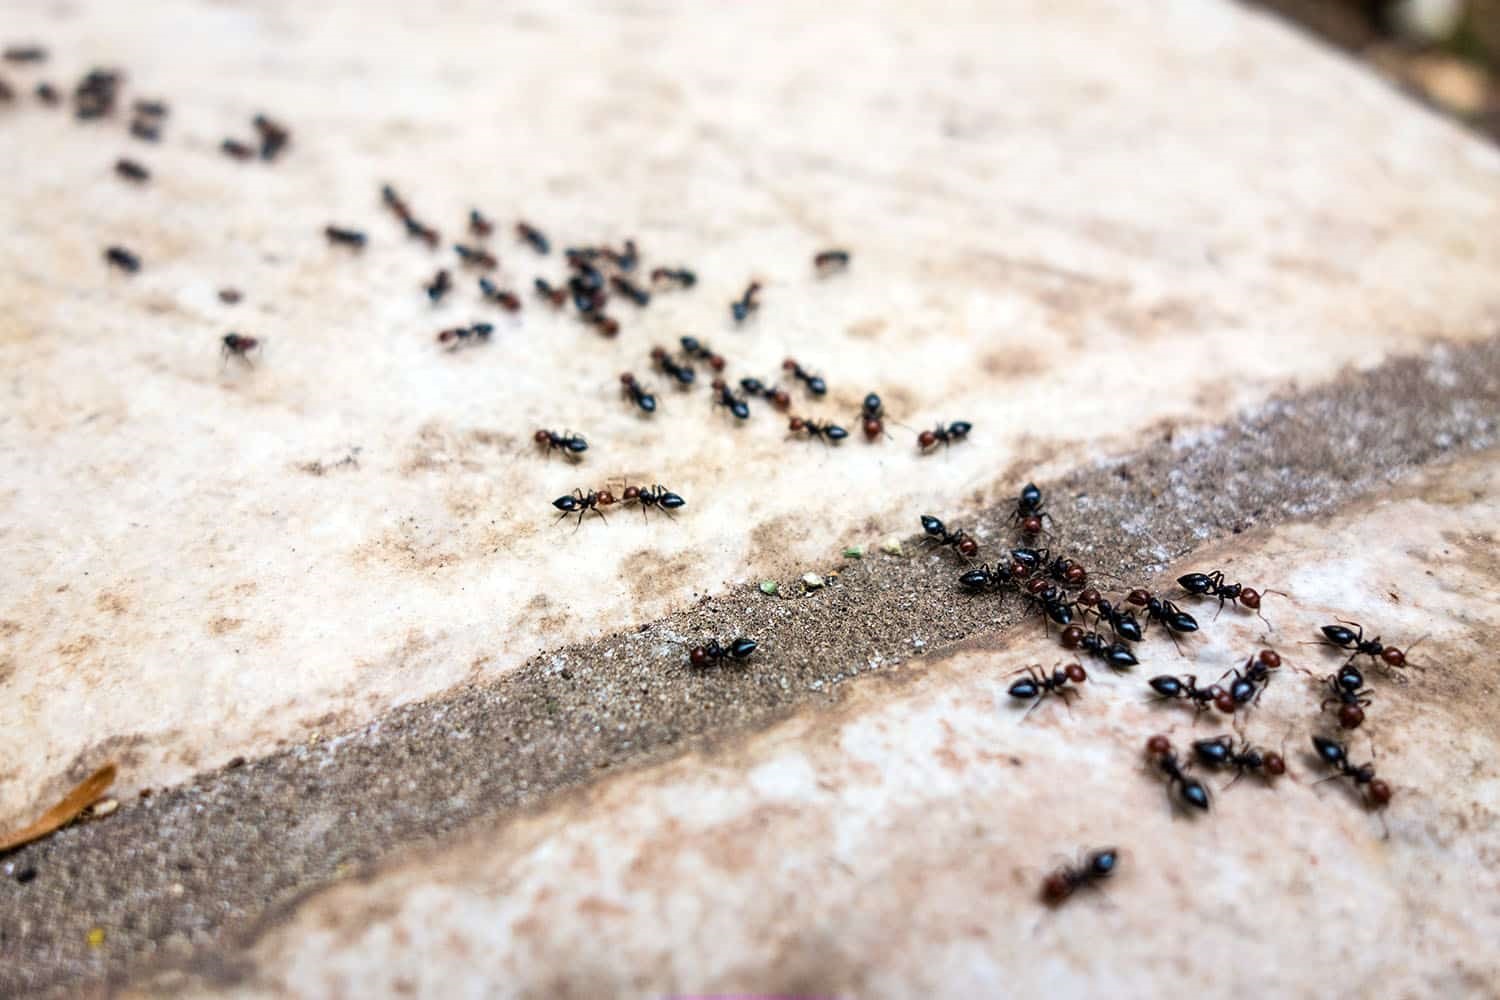 Getaway ants from your house in easy ways 1